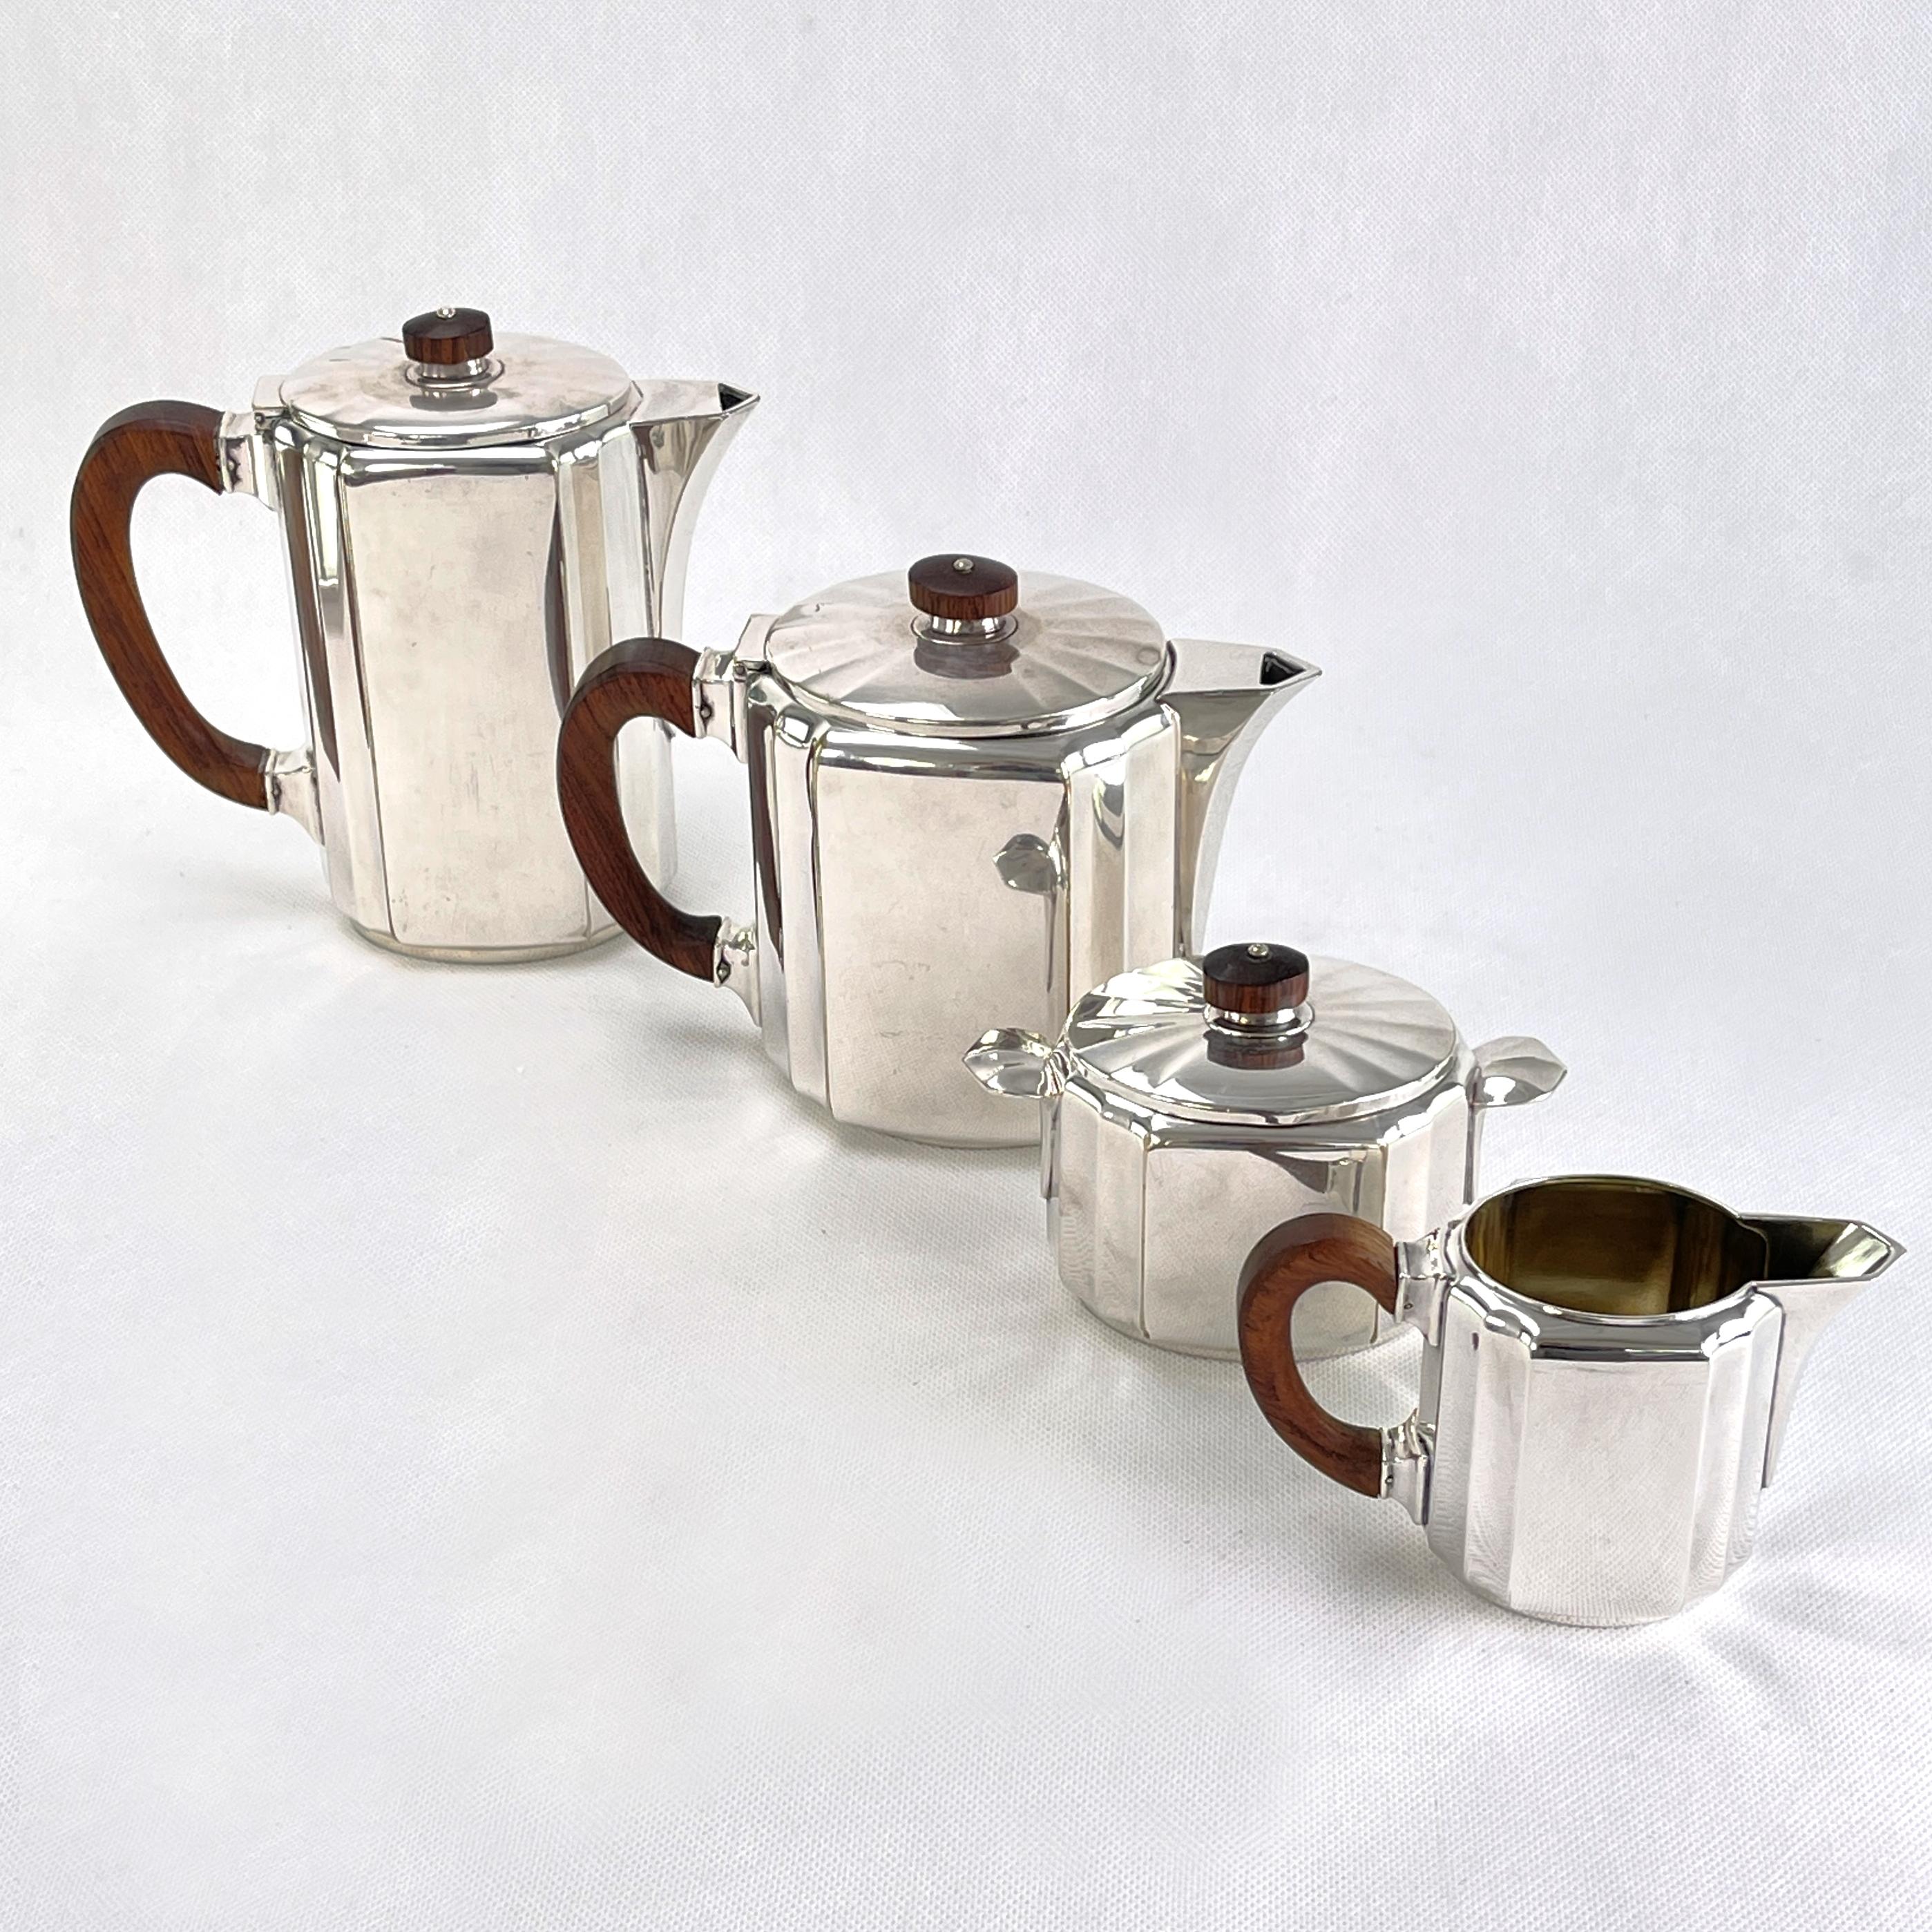 Coffee/tea set - 1920s

This coffee set was made by the manufracture Christofle in france. The item from the 1920s is in the typical style of the streamline modern. It includes a coffee pot, teapot, sugar bowl, creamer and a handled tray.

The